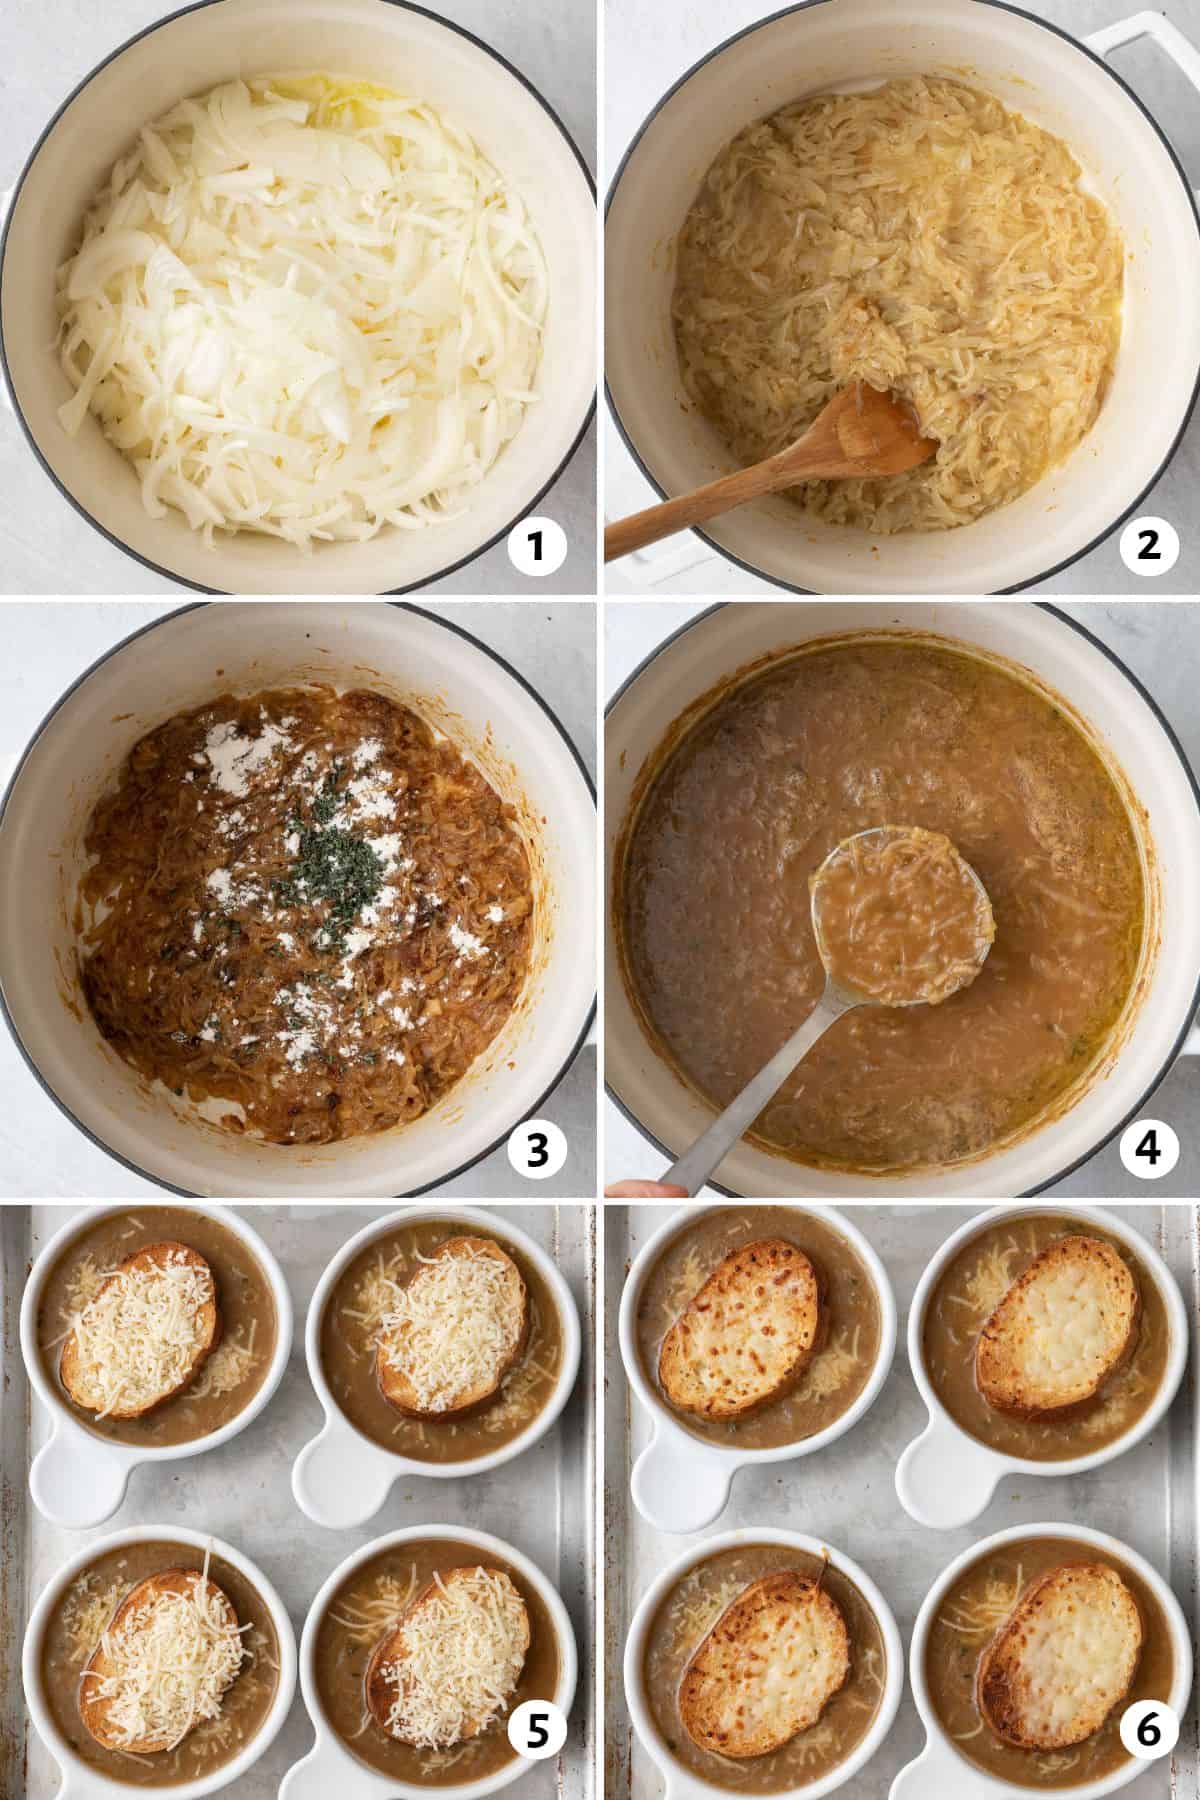 6 image collage make recipe: 1- sliced onions with melted butter being sauteed in large dutch oven, 2- onions after starting to carmalize, 3- deeply caramalized onions with flour and thyme sprinkled in, 4- soup after broth and venegar added after thickened with ladle scooping some up, 5- 4 bowls of soup on a sheet pan with a piece of toasted bread and shredded cheese sprinkled on top, 6- bowls after broiling to show melty cheese.